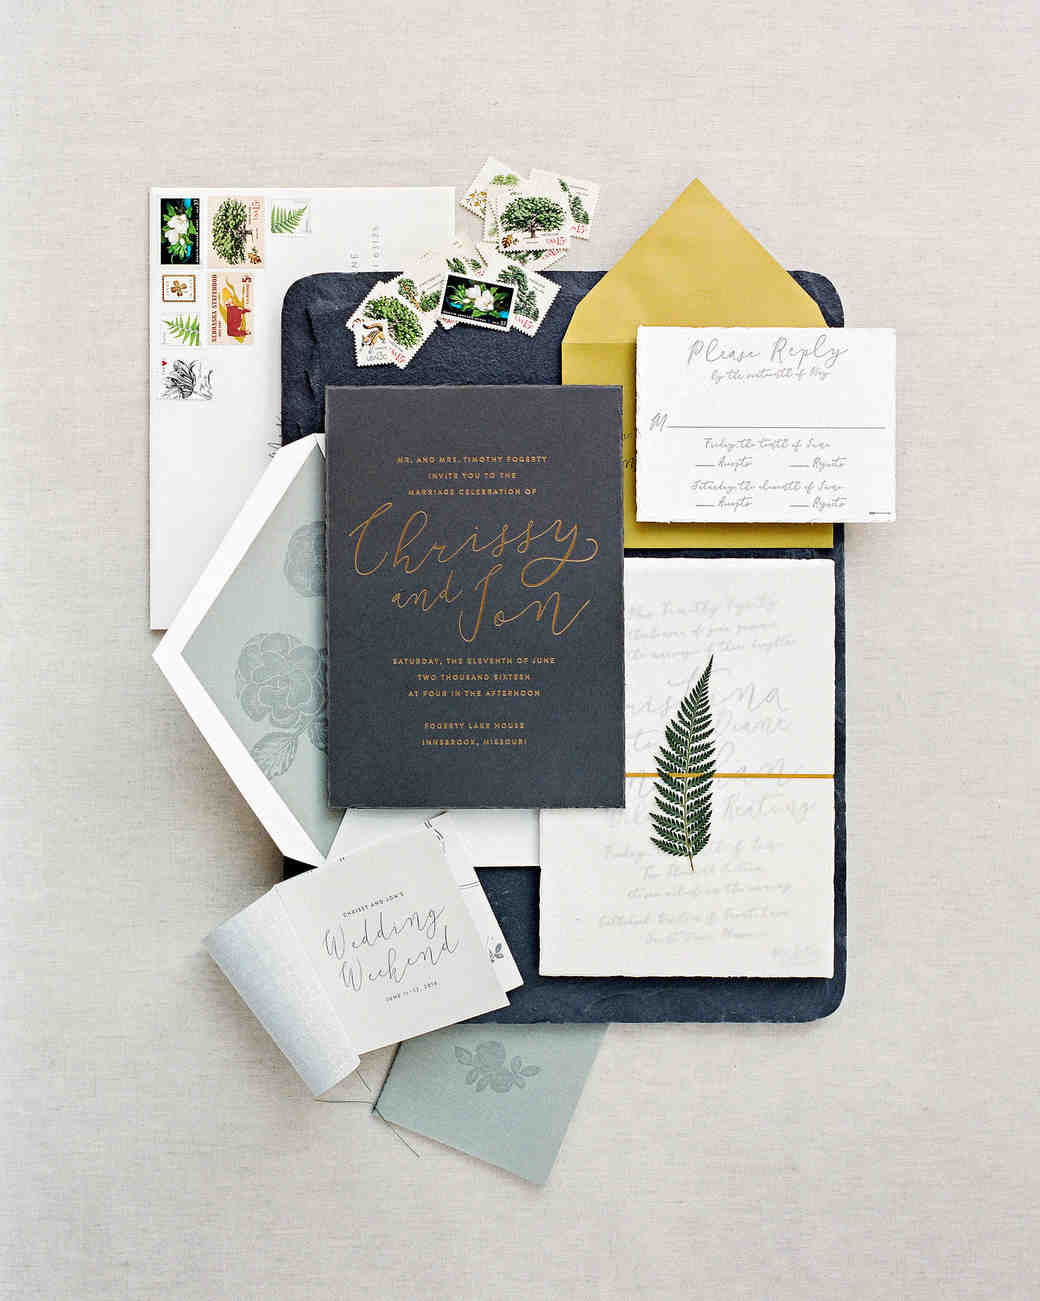 46 Elevated Ideas For Your Rustic Wedding Invitations Martha